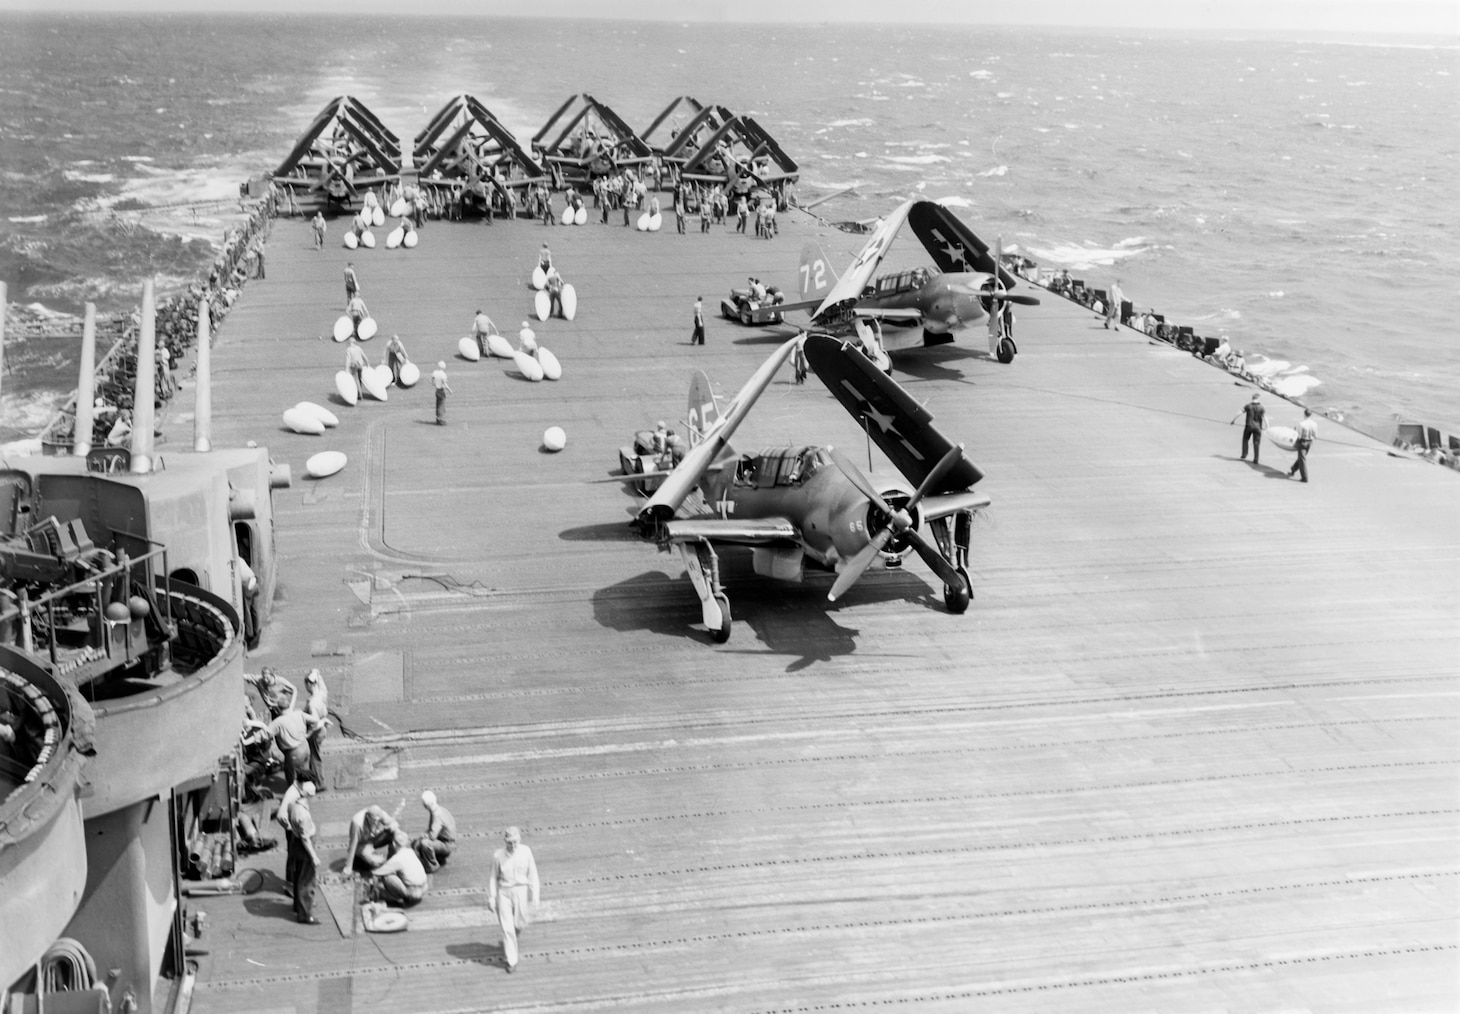 Battle of Leyte Gulf, October 1944. Loading drop tanks on SB2Cs aboard USS LEXINGTON (CV-16) before a search mission, on 25 October 1944